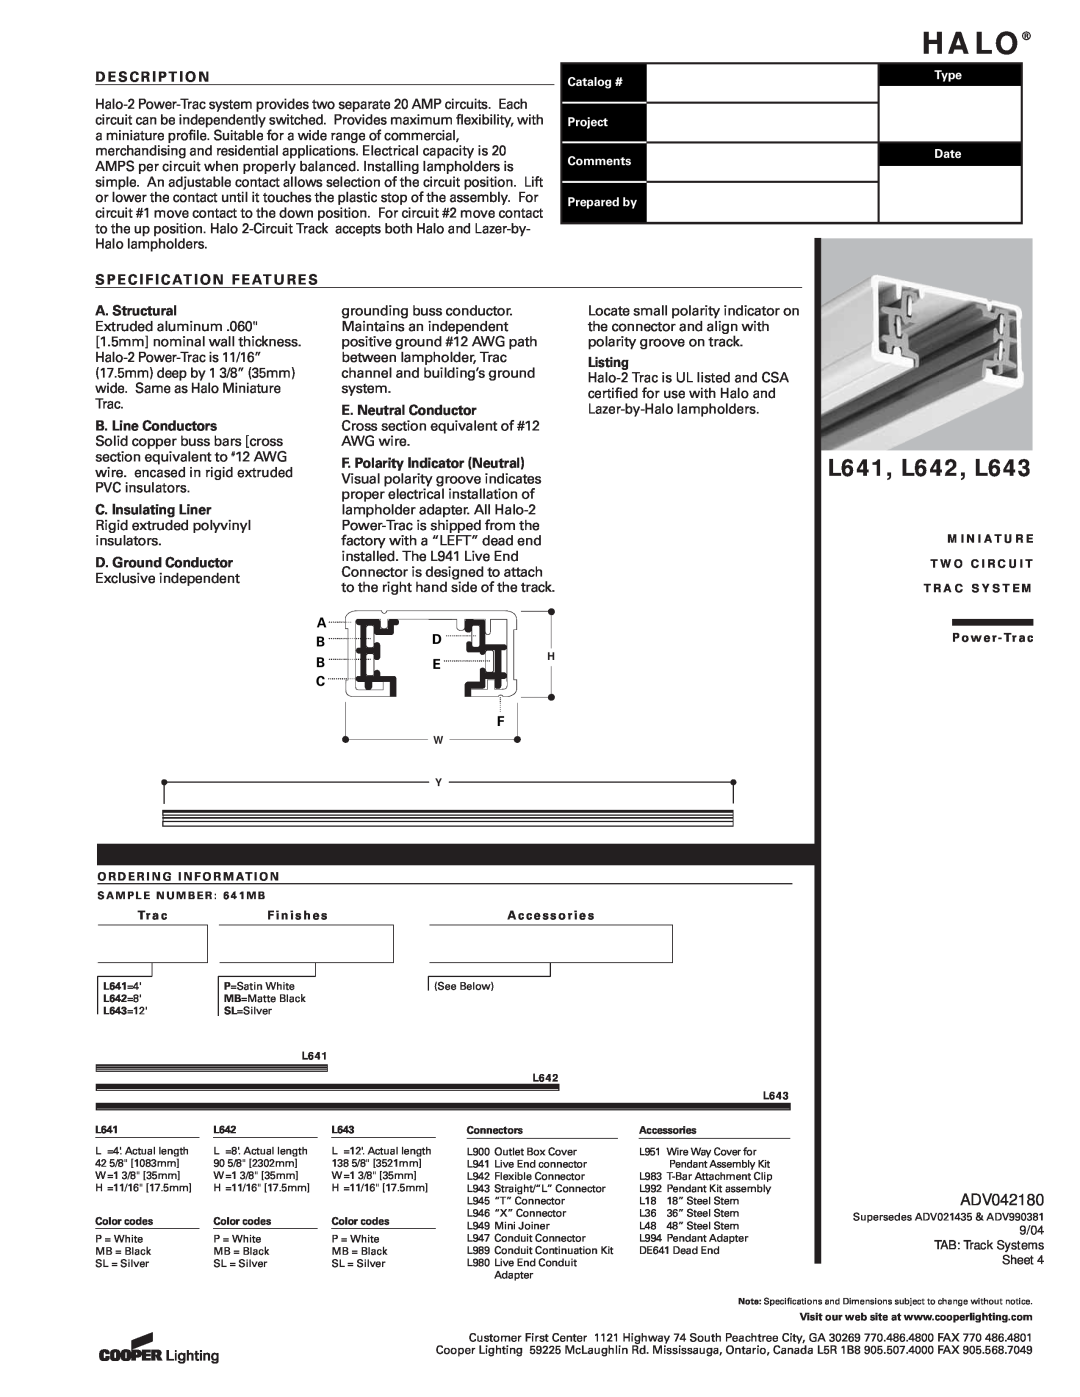 Cooper Lighting L643 specifications Halo, D E S C R I P T I O N, Specification Features, A. Structural, Listing, ADV042180 